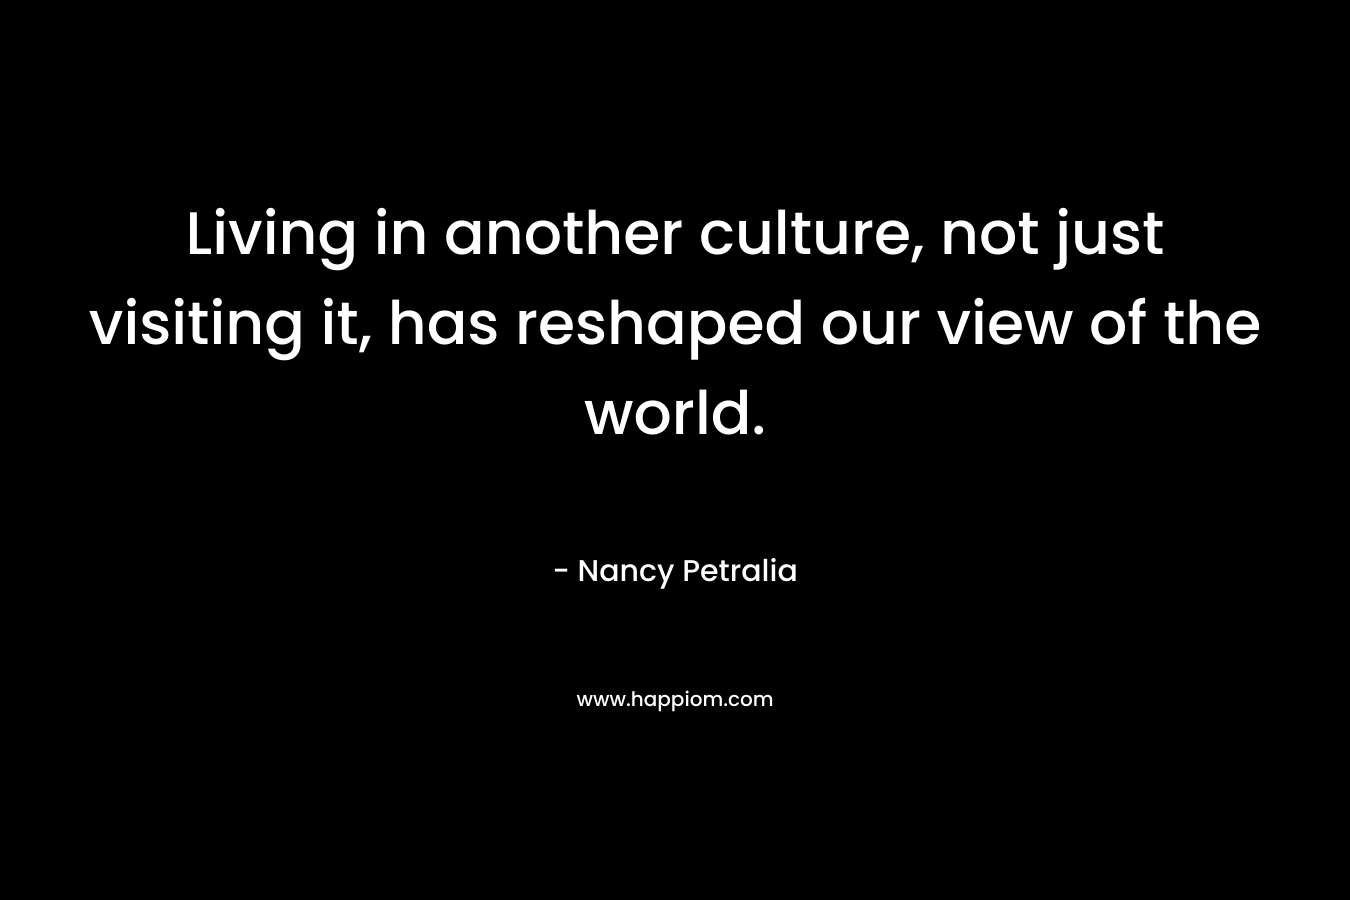 Living in another culture, not just visiting it, has reshaped our view of the world. – Nancy Petralia